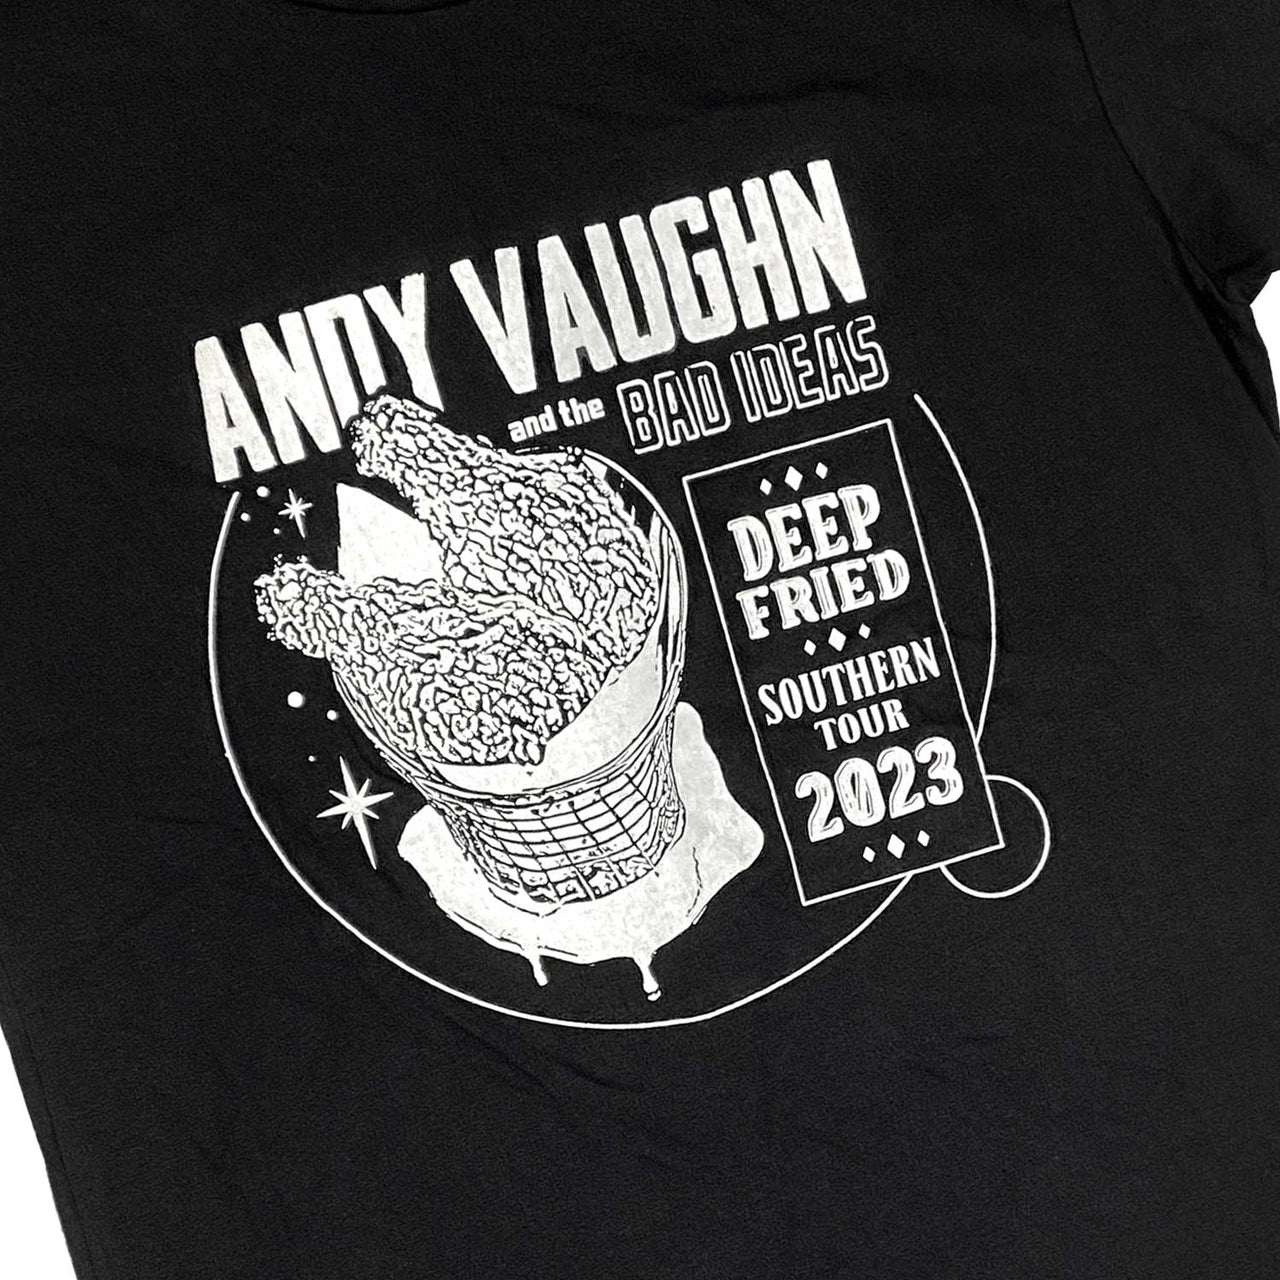 ANDY VAUGHN AND THE BAD IDEAS DEEP FRIED T-SHIRT